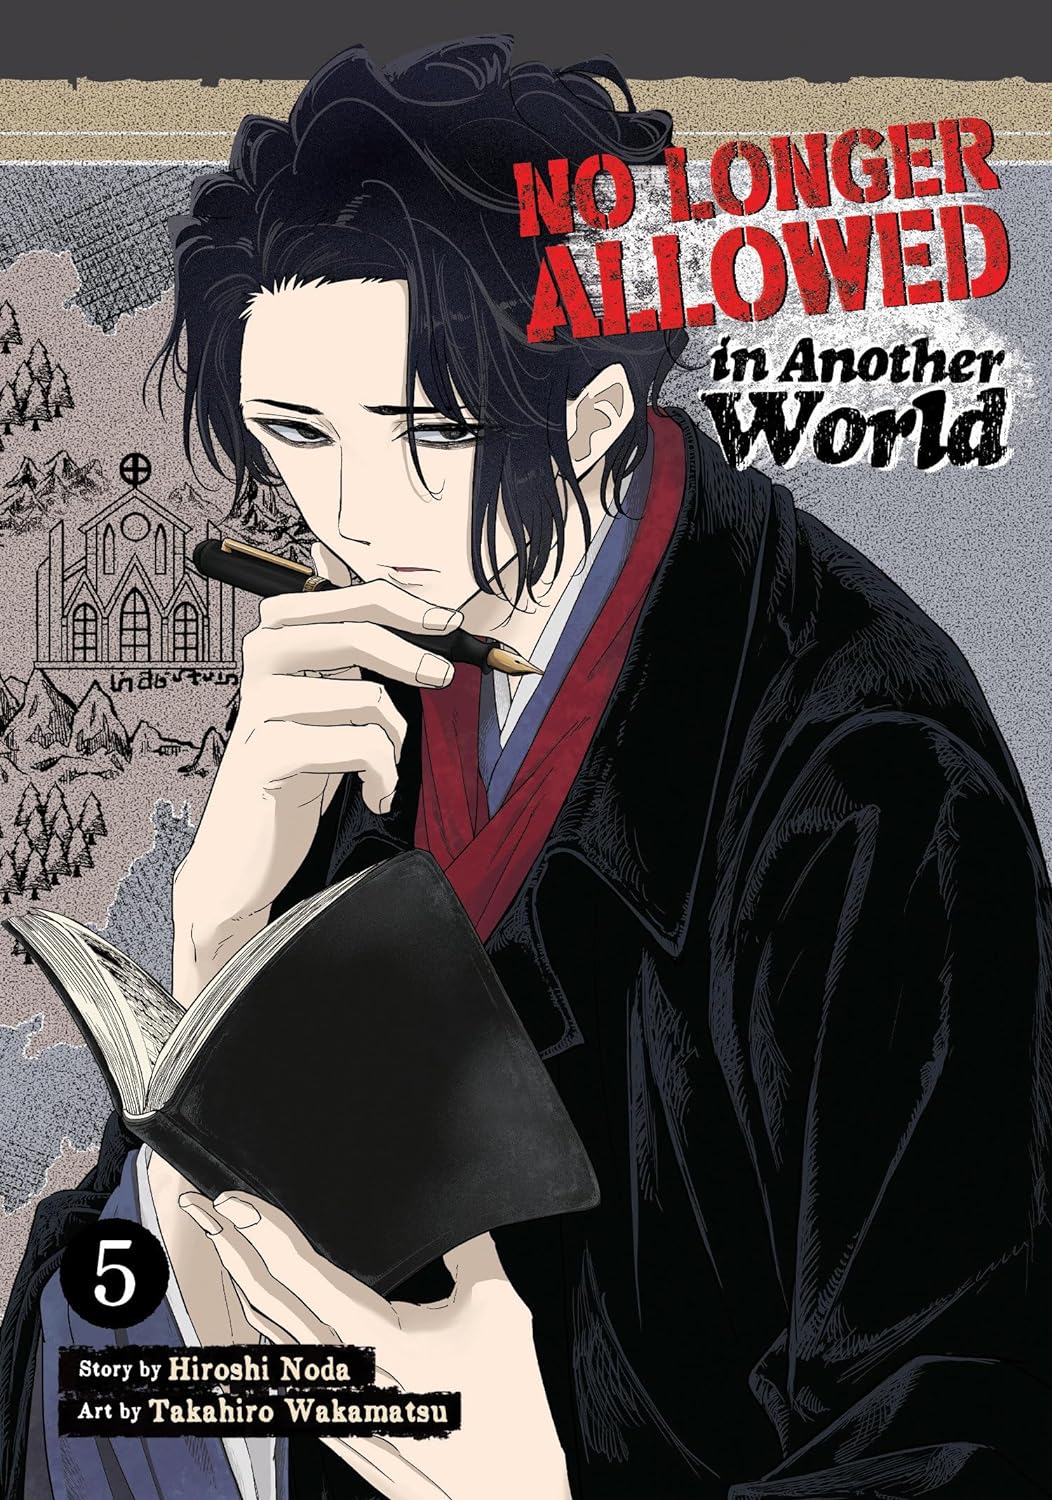 No Longer Allowed in Another World Vol. 05